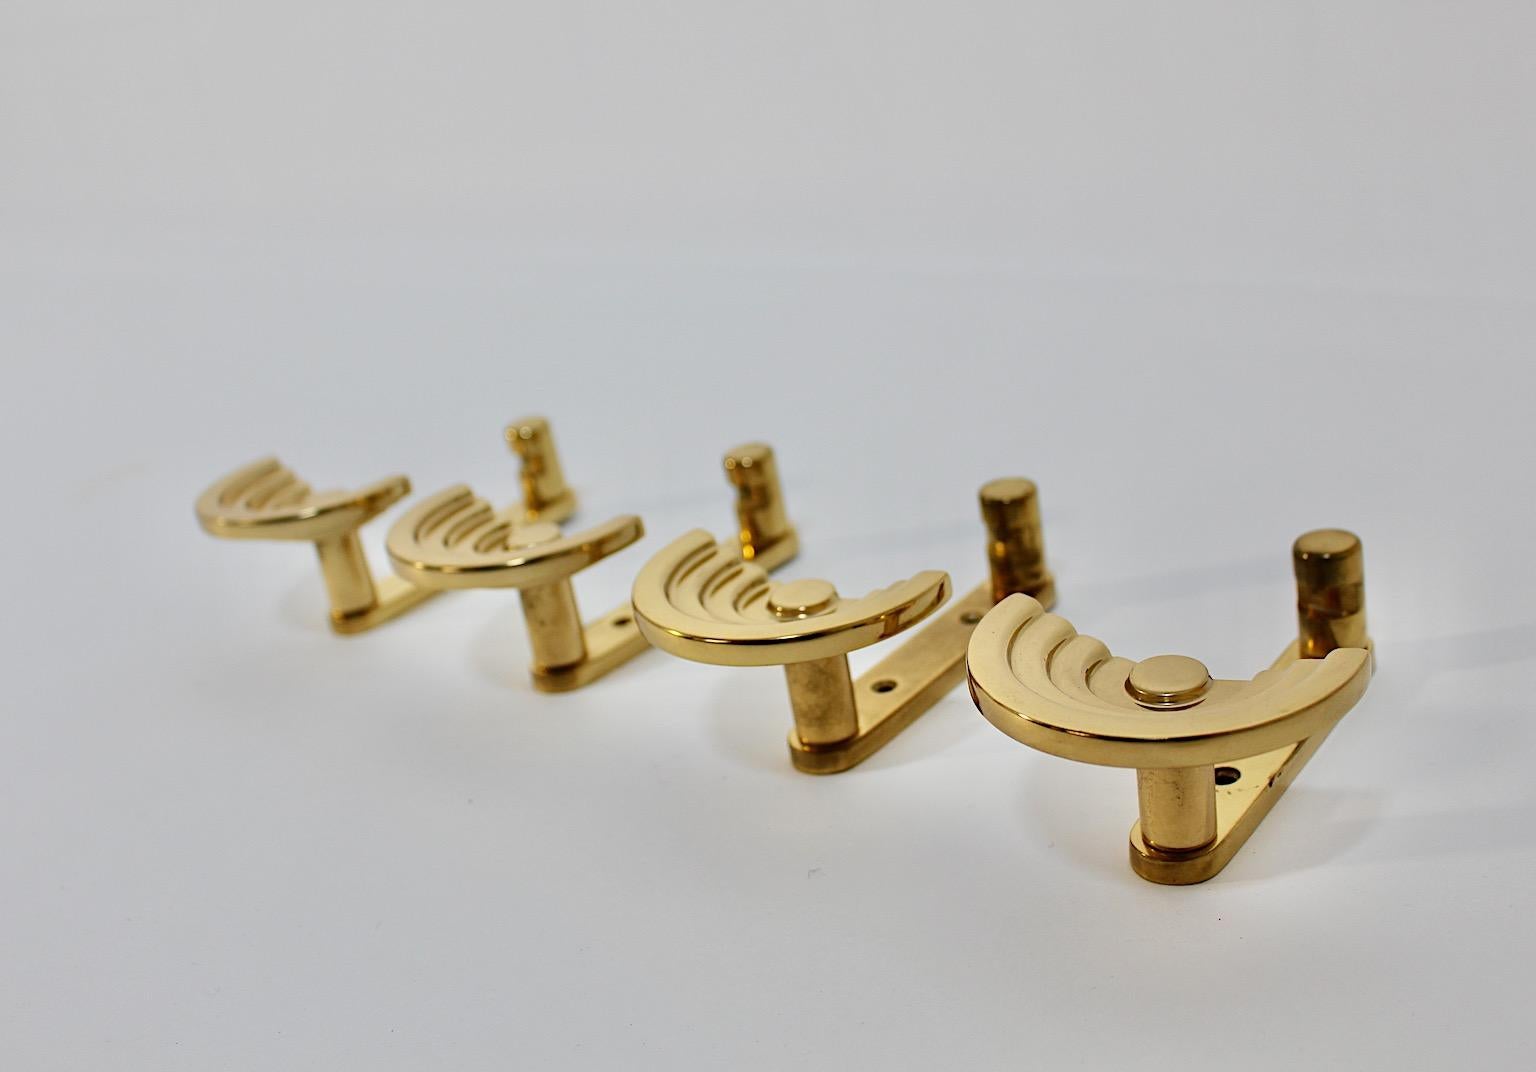 Ettore Sottsass vintage wall mounted hooks coat hooks from brass 
Valli & Valli circa 1985 Italy.
A wonderful poetic set of four ( 4 ) coat hooks from polished brass designed by Ettore Sottsass for Valli & Valli circa 1985 Italy.
These fabulous coat